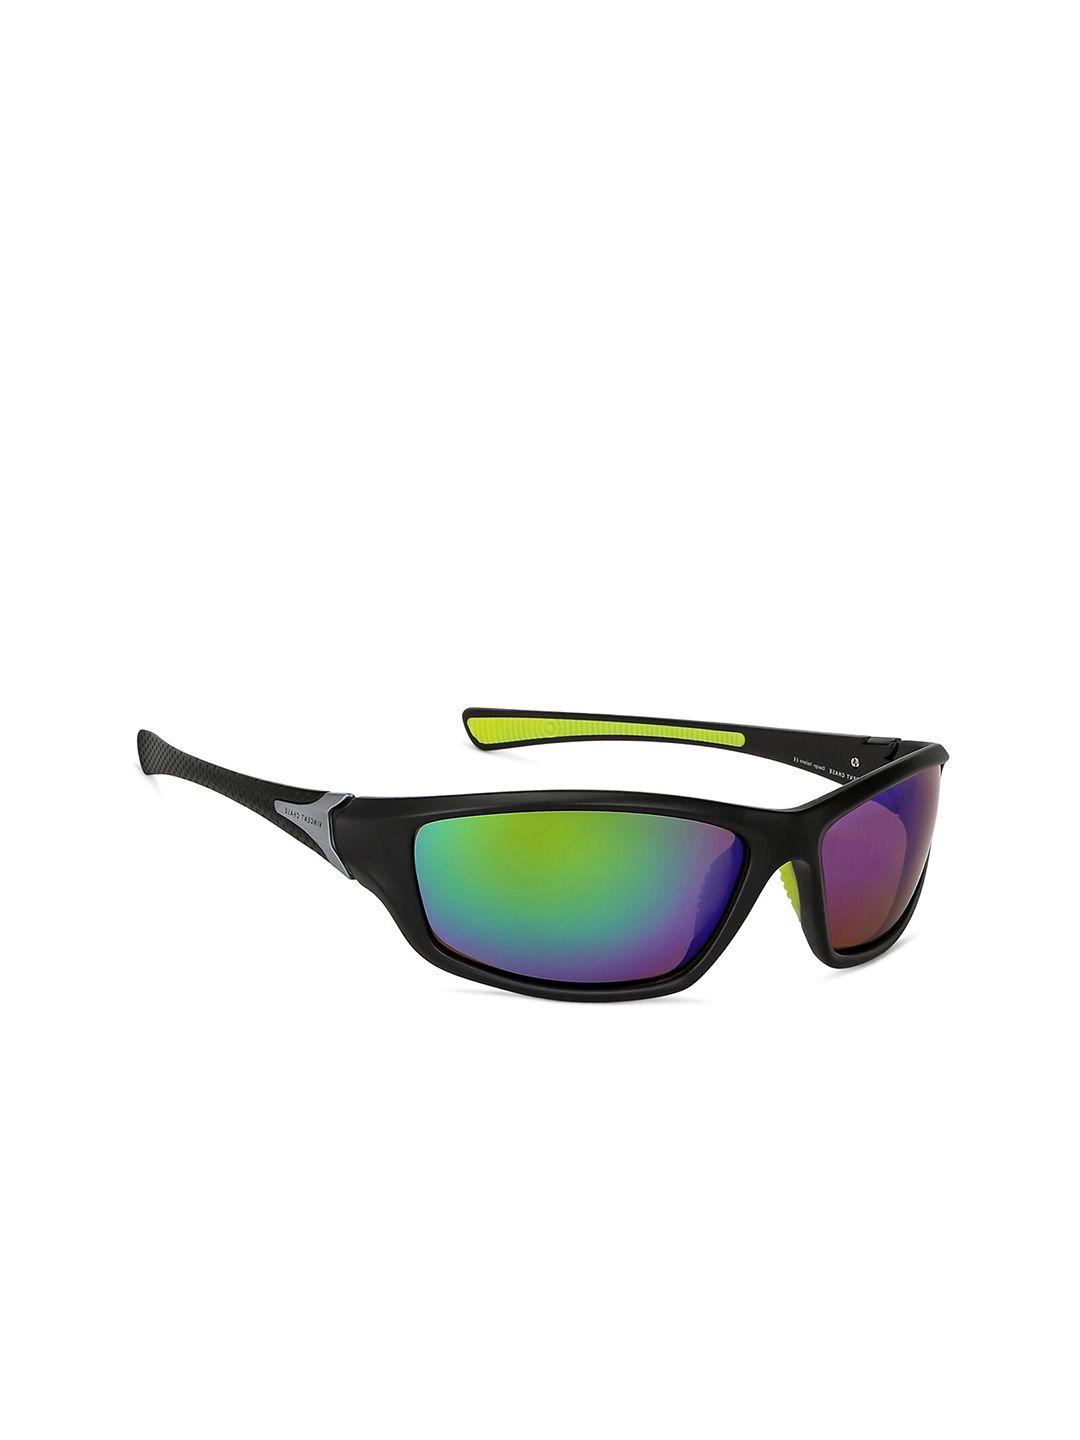 vincent chase unisex green lens & black sports sunglasses with polarised and uv protected lens